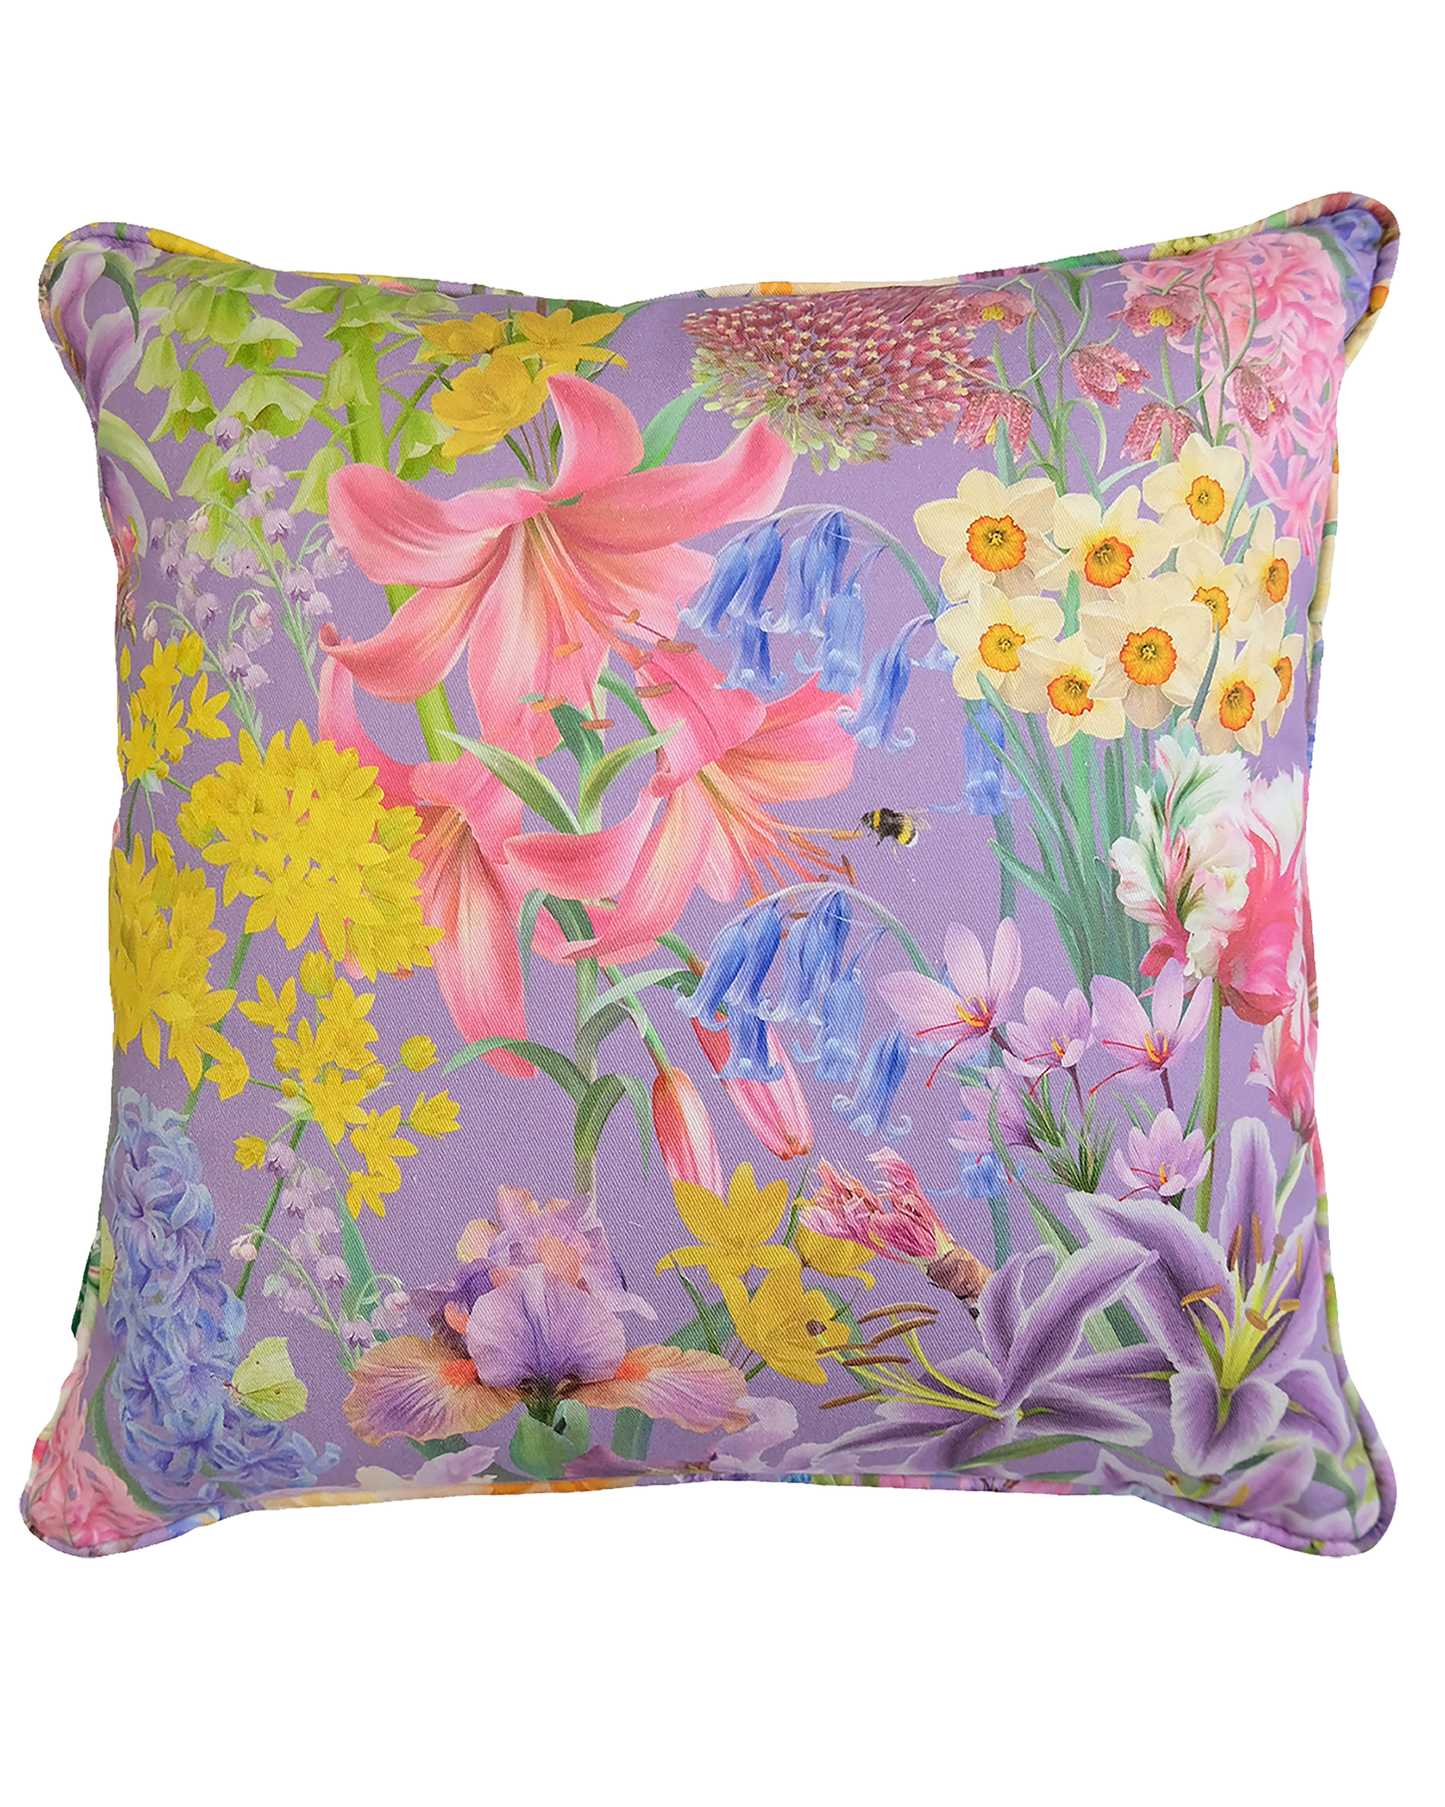 Amethyst purple spring floral designer piped cushion for colourful interiors in organic sustainable fabrics